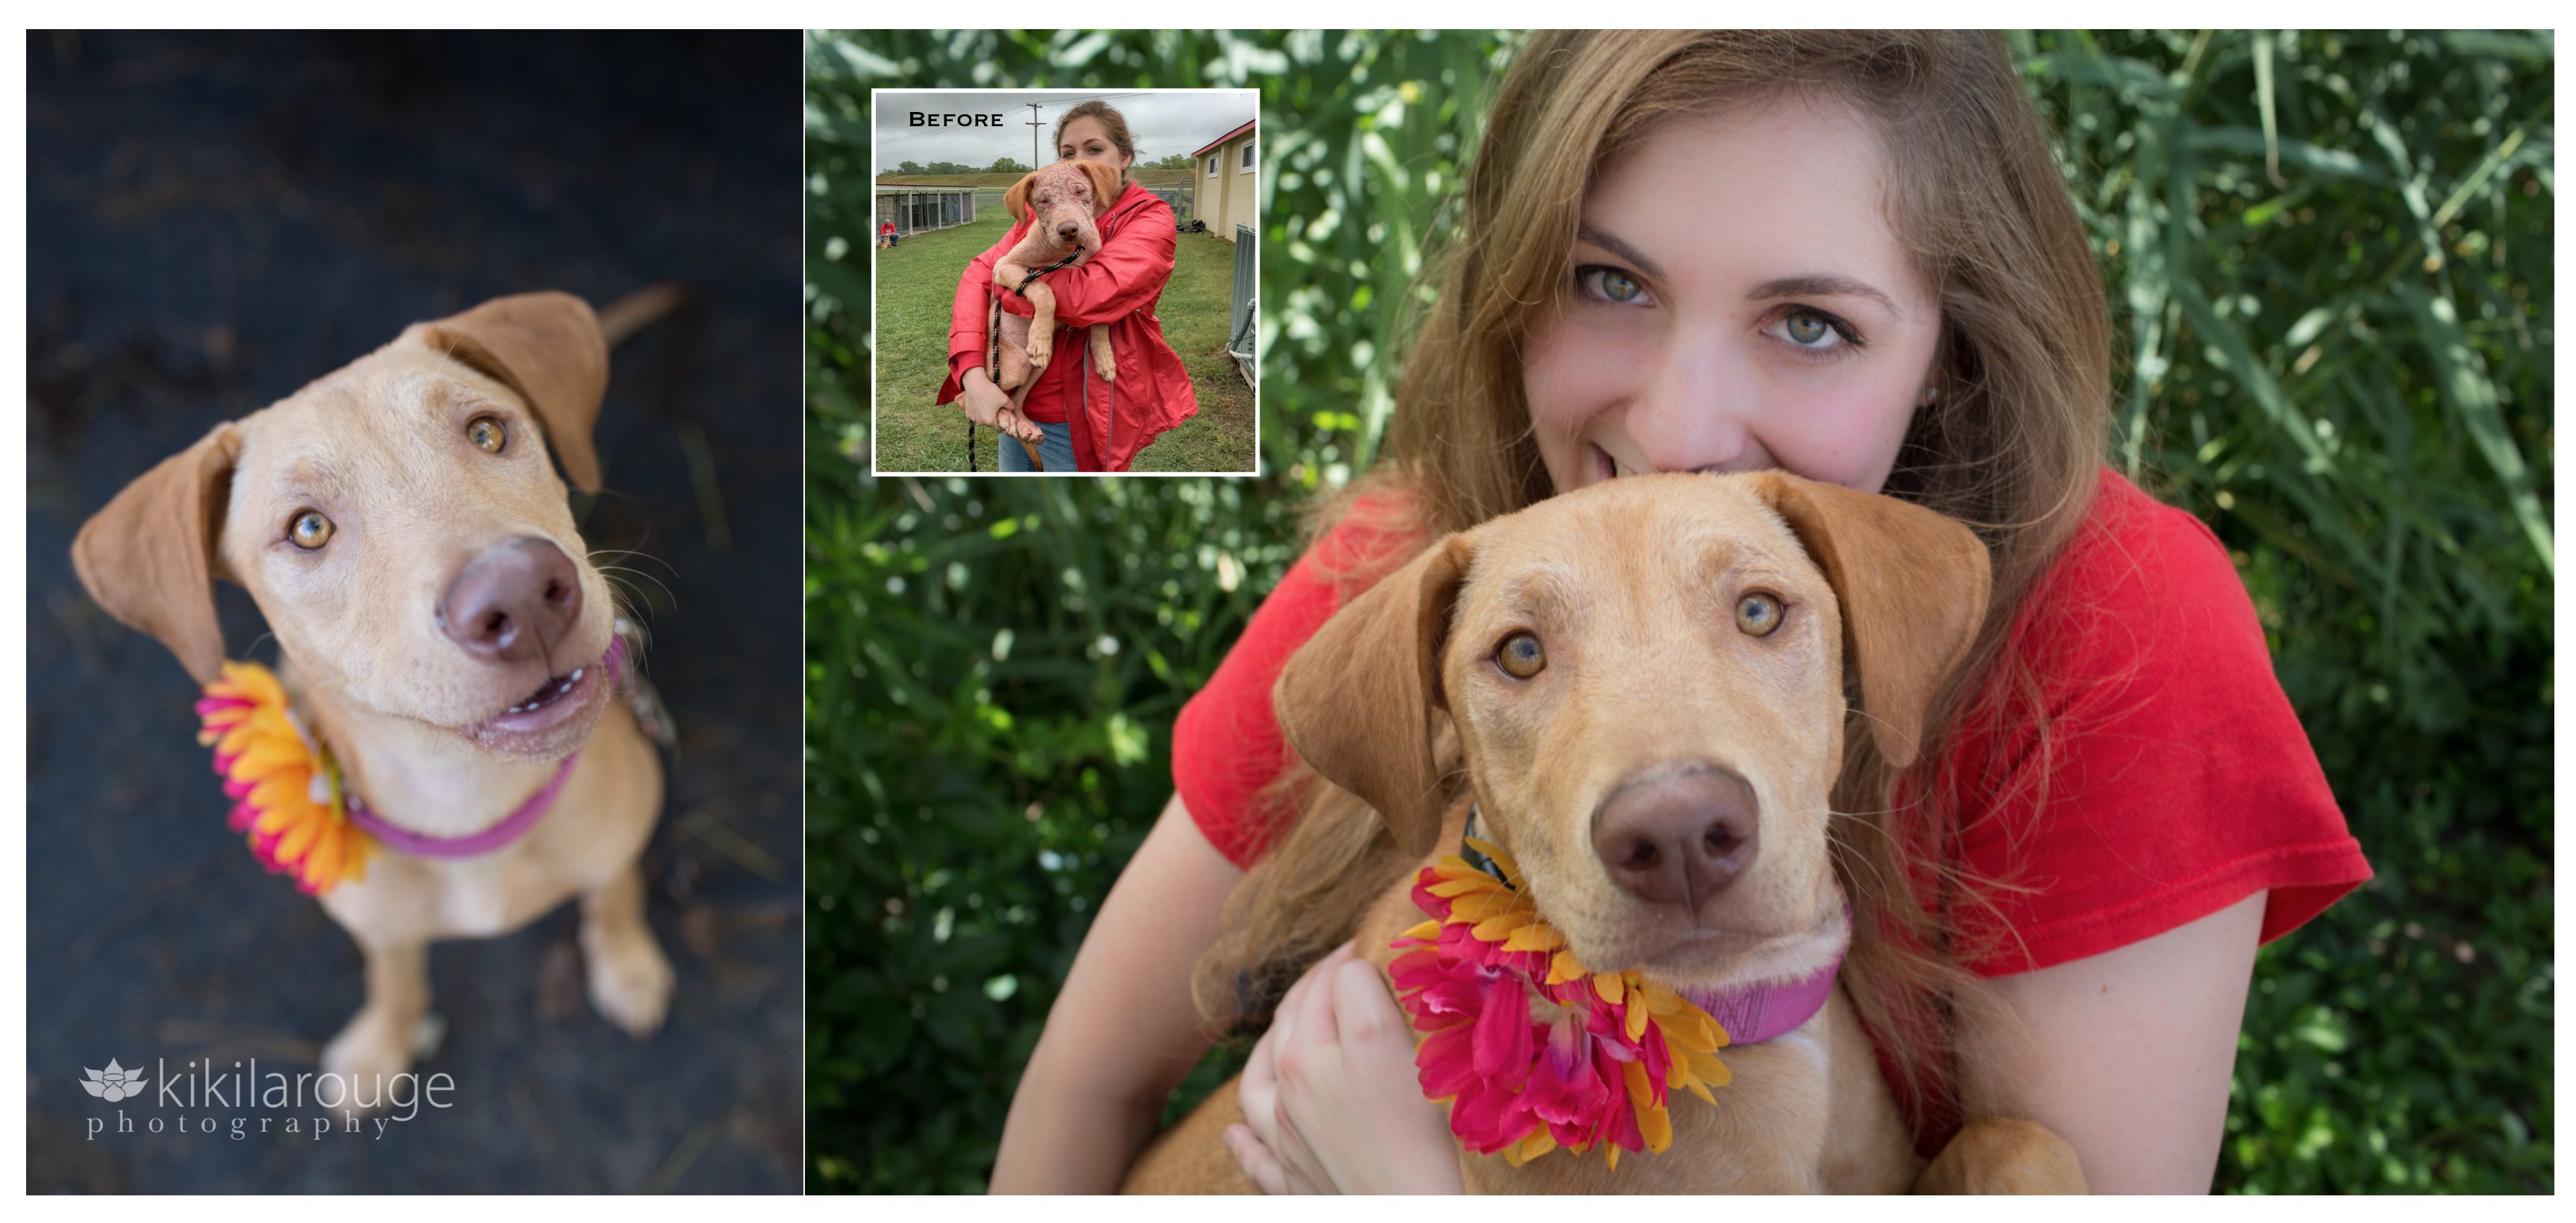 Before and After Rescue Dog Portraits